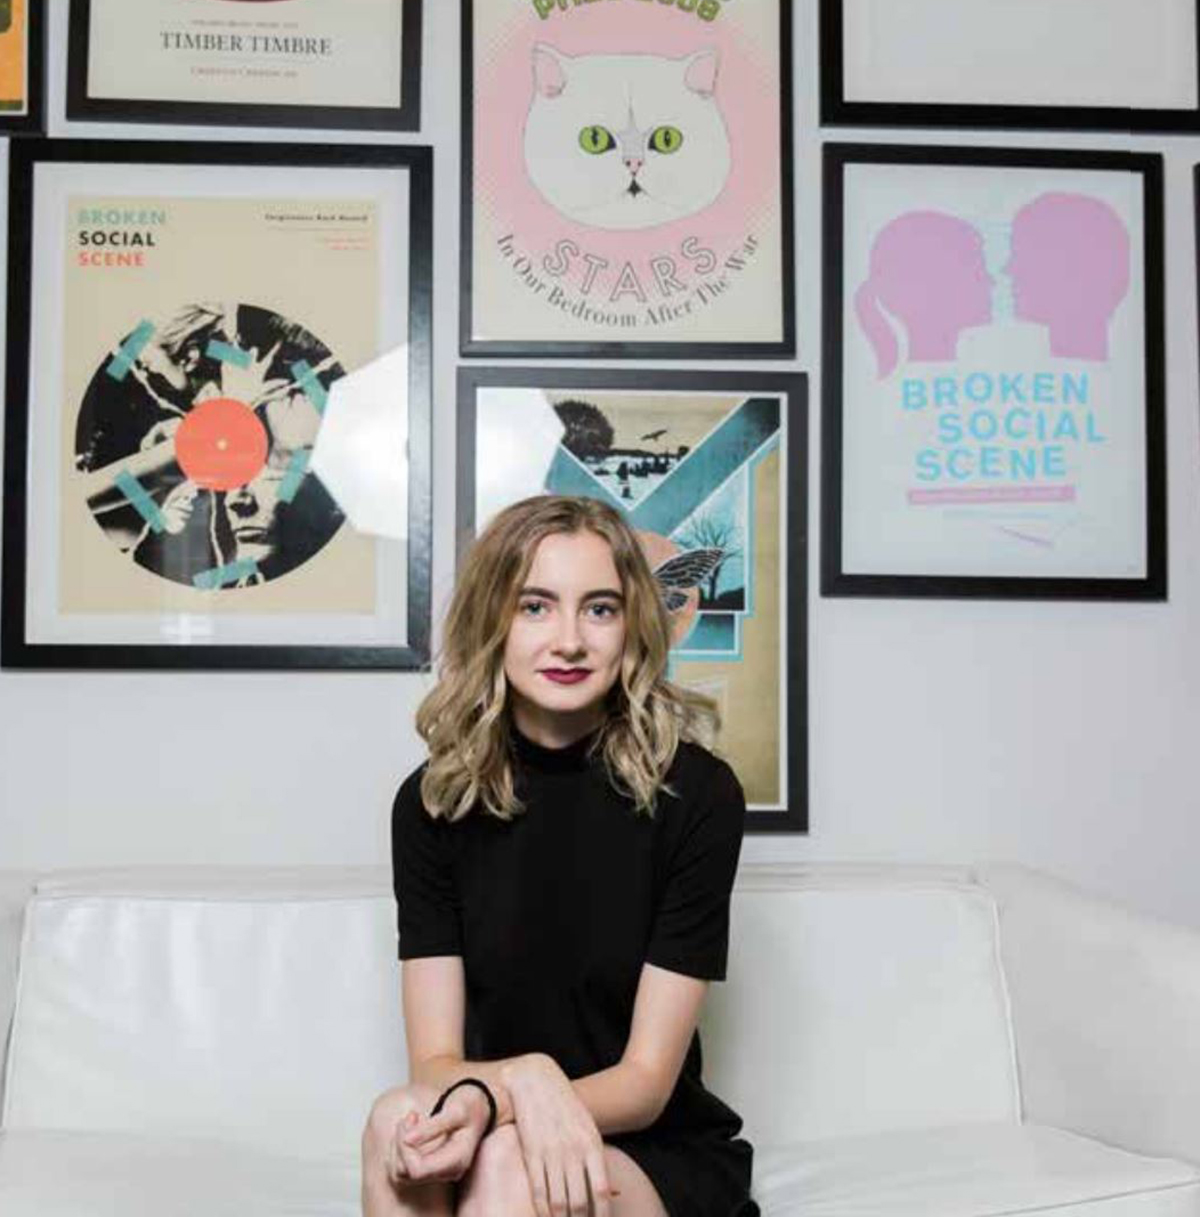 Laura MacMullin sits on a couch surround by photos of album covers at her internship.